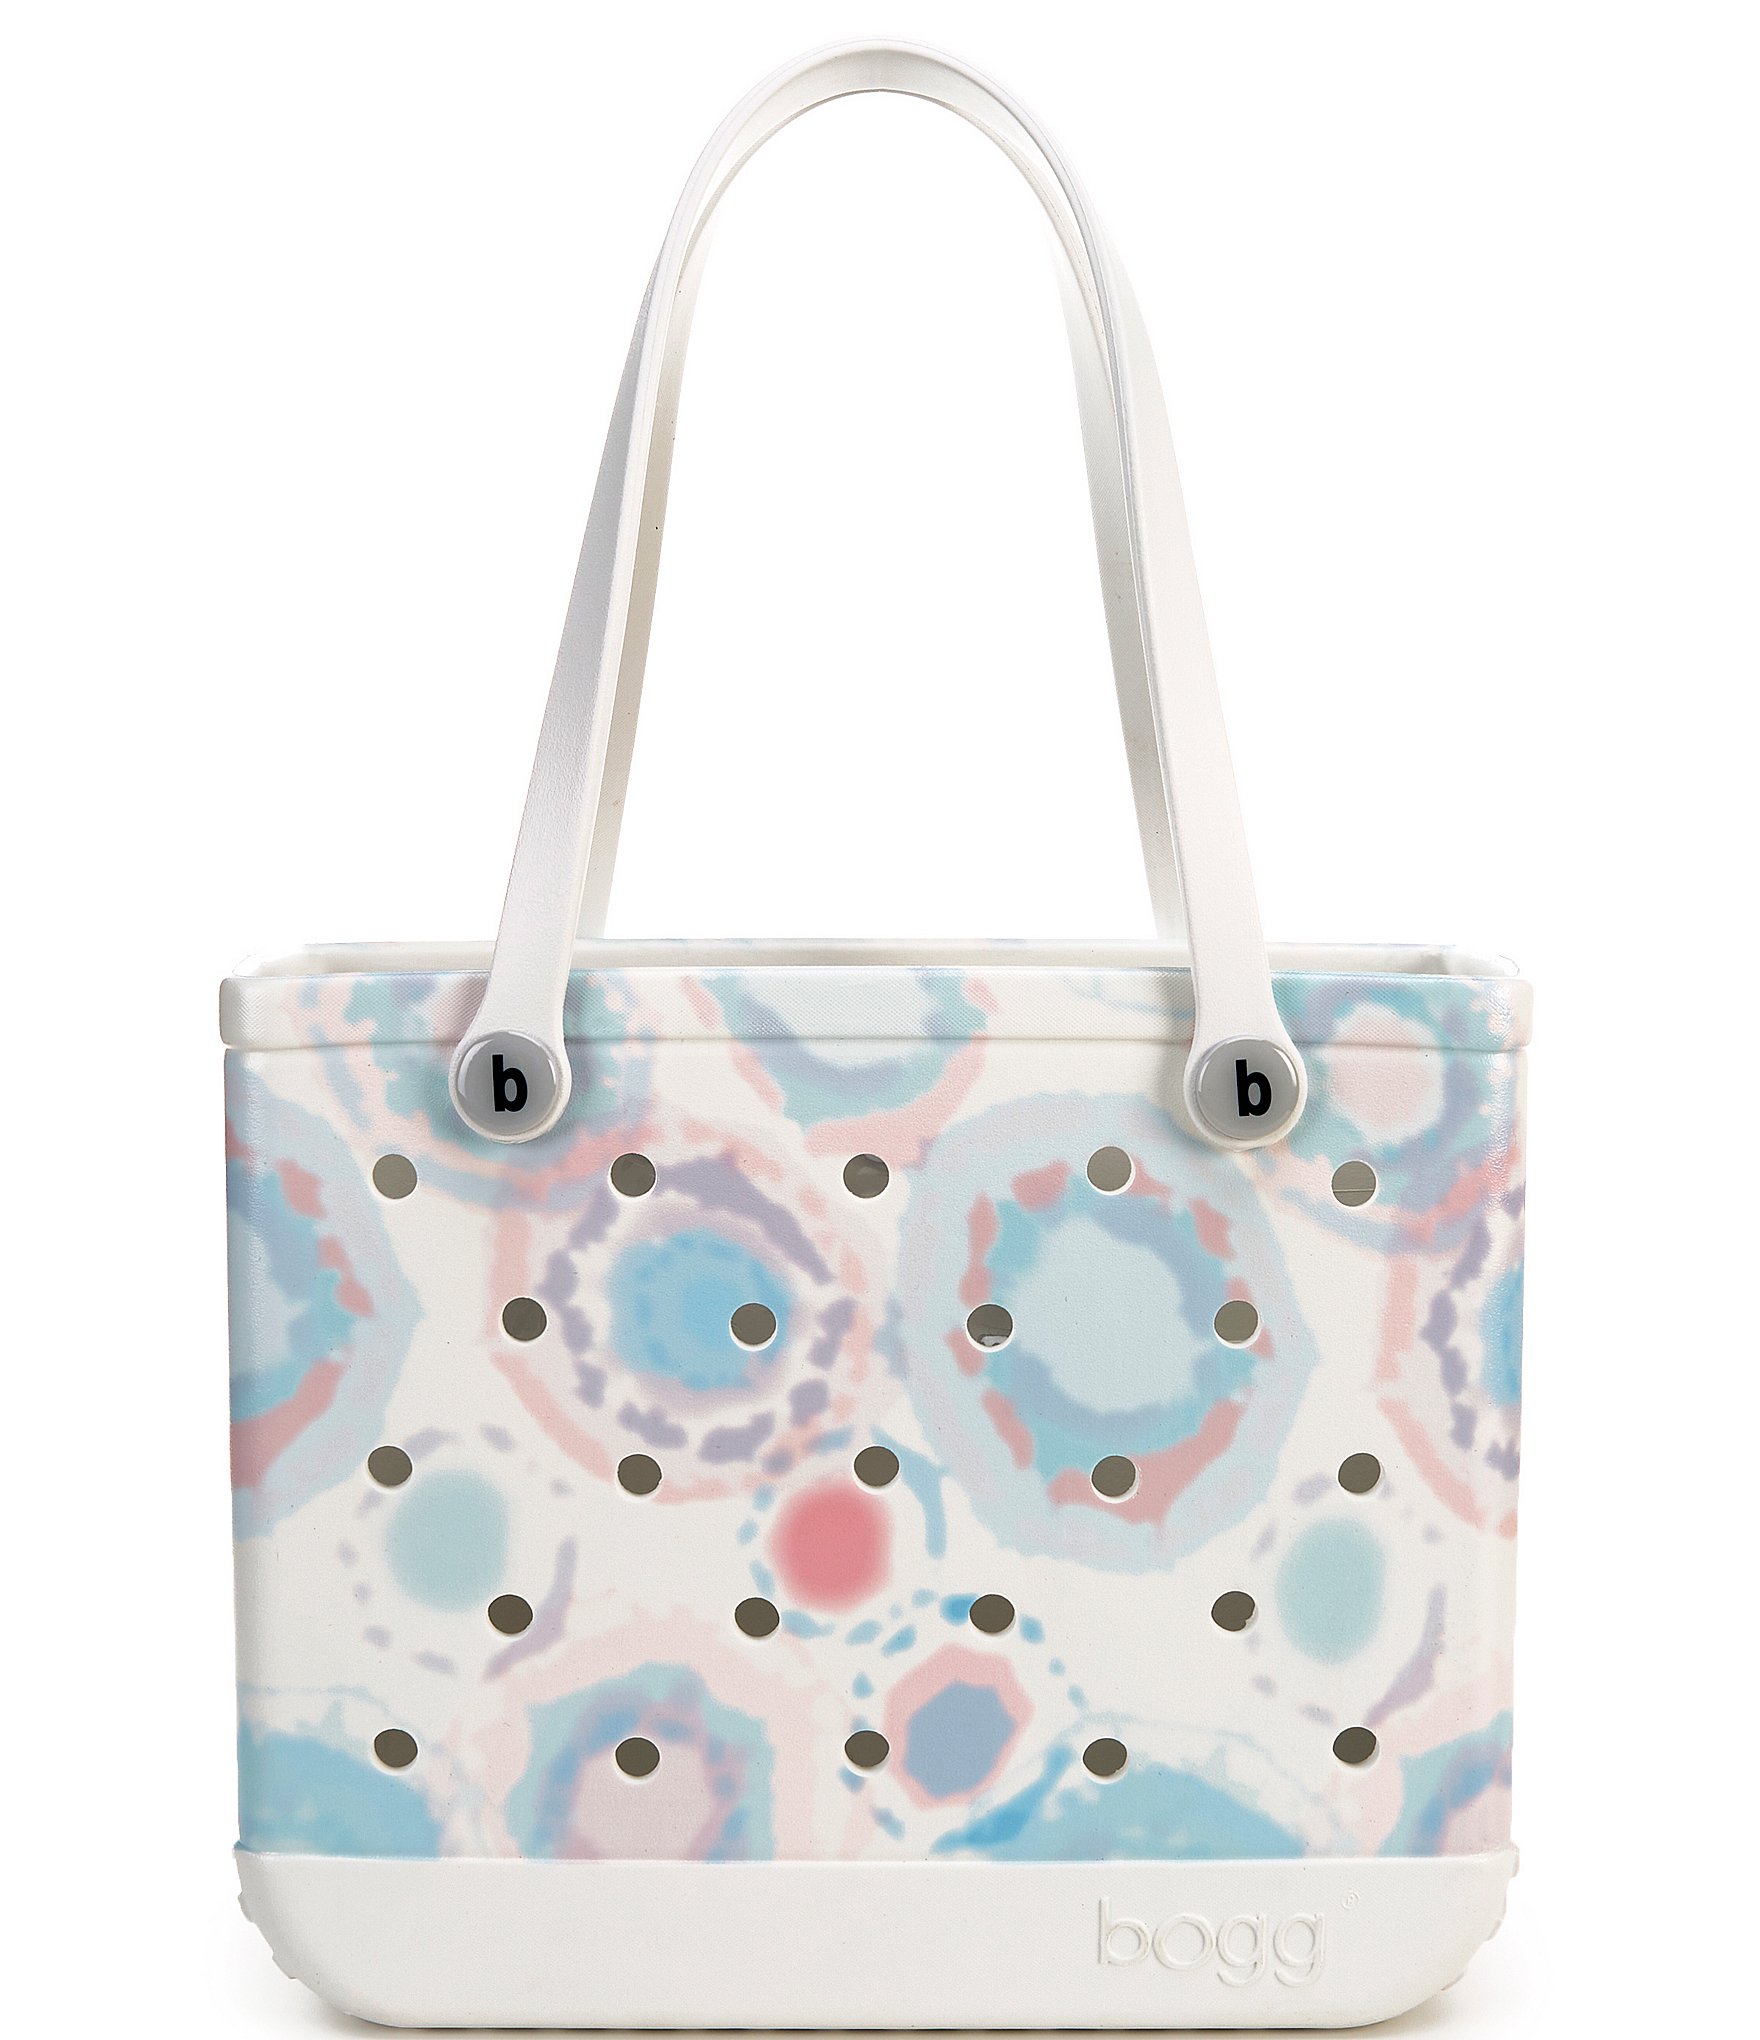 Bogg Bag Baby Small Tote - Tie Dye - Athens Parent Wellbeing +